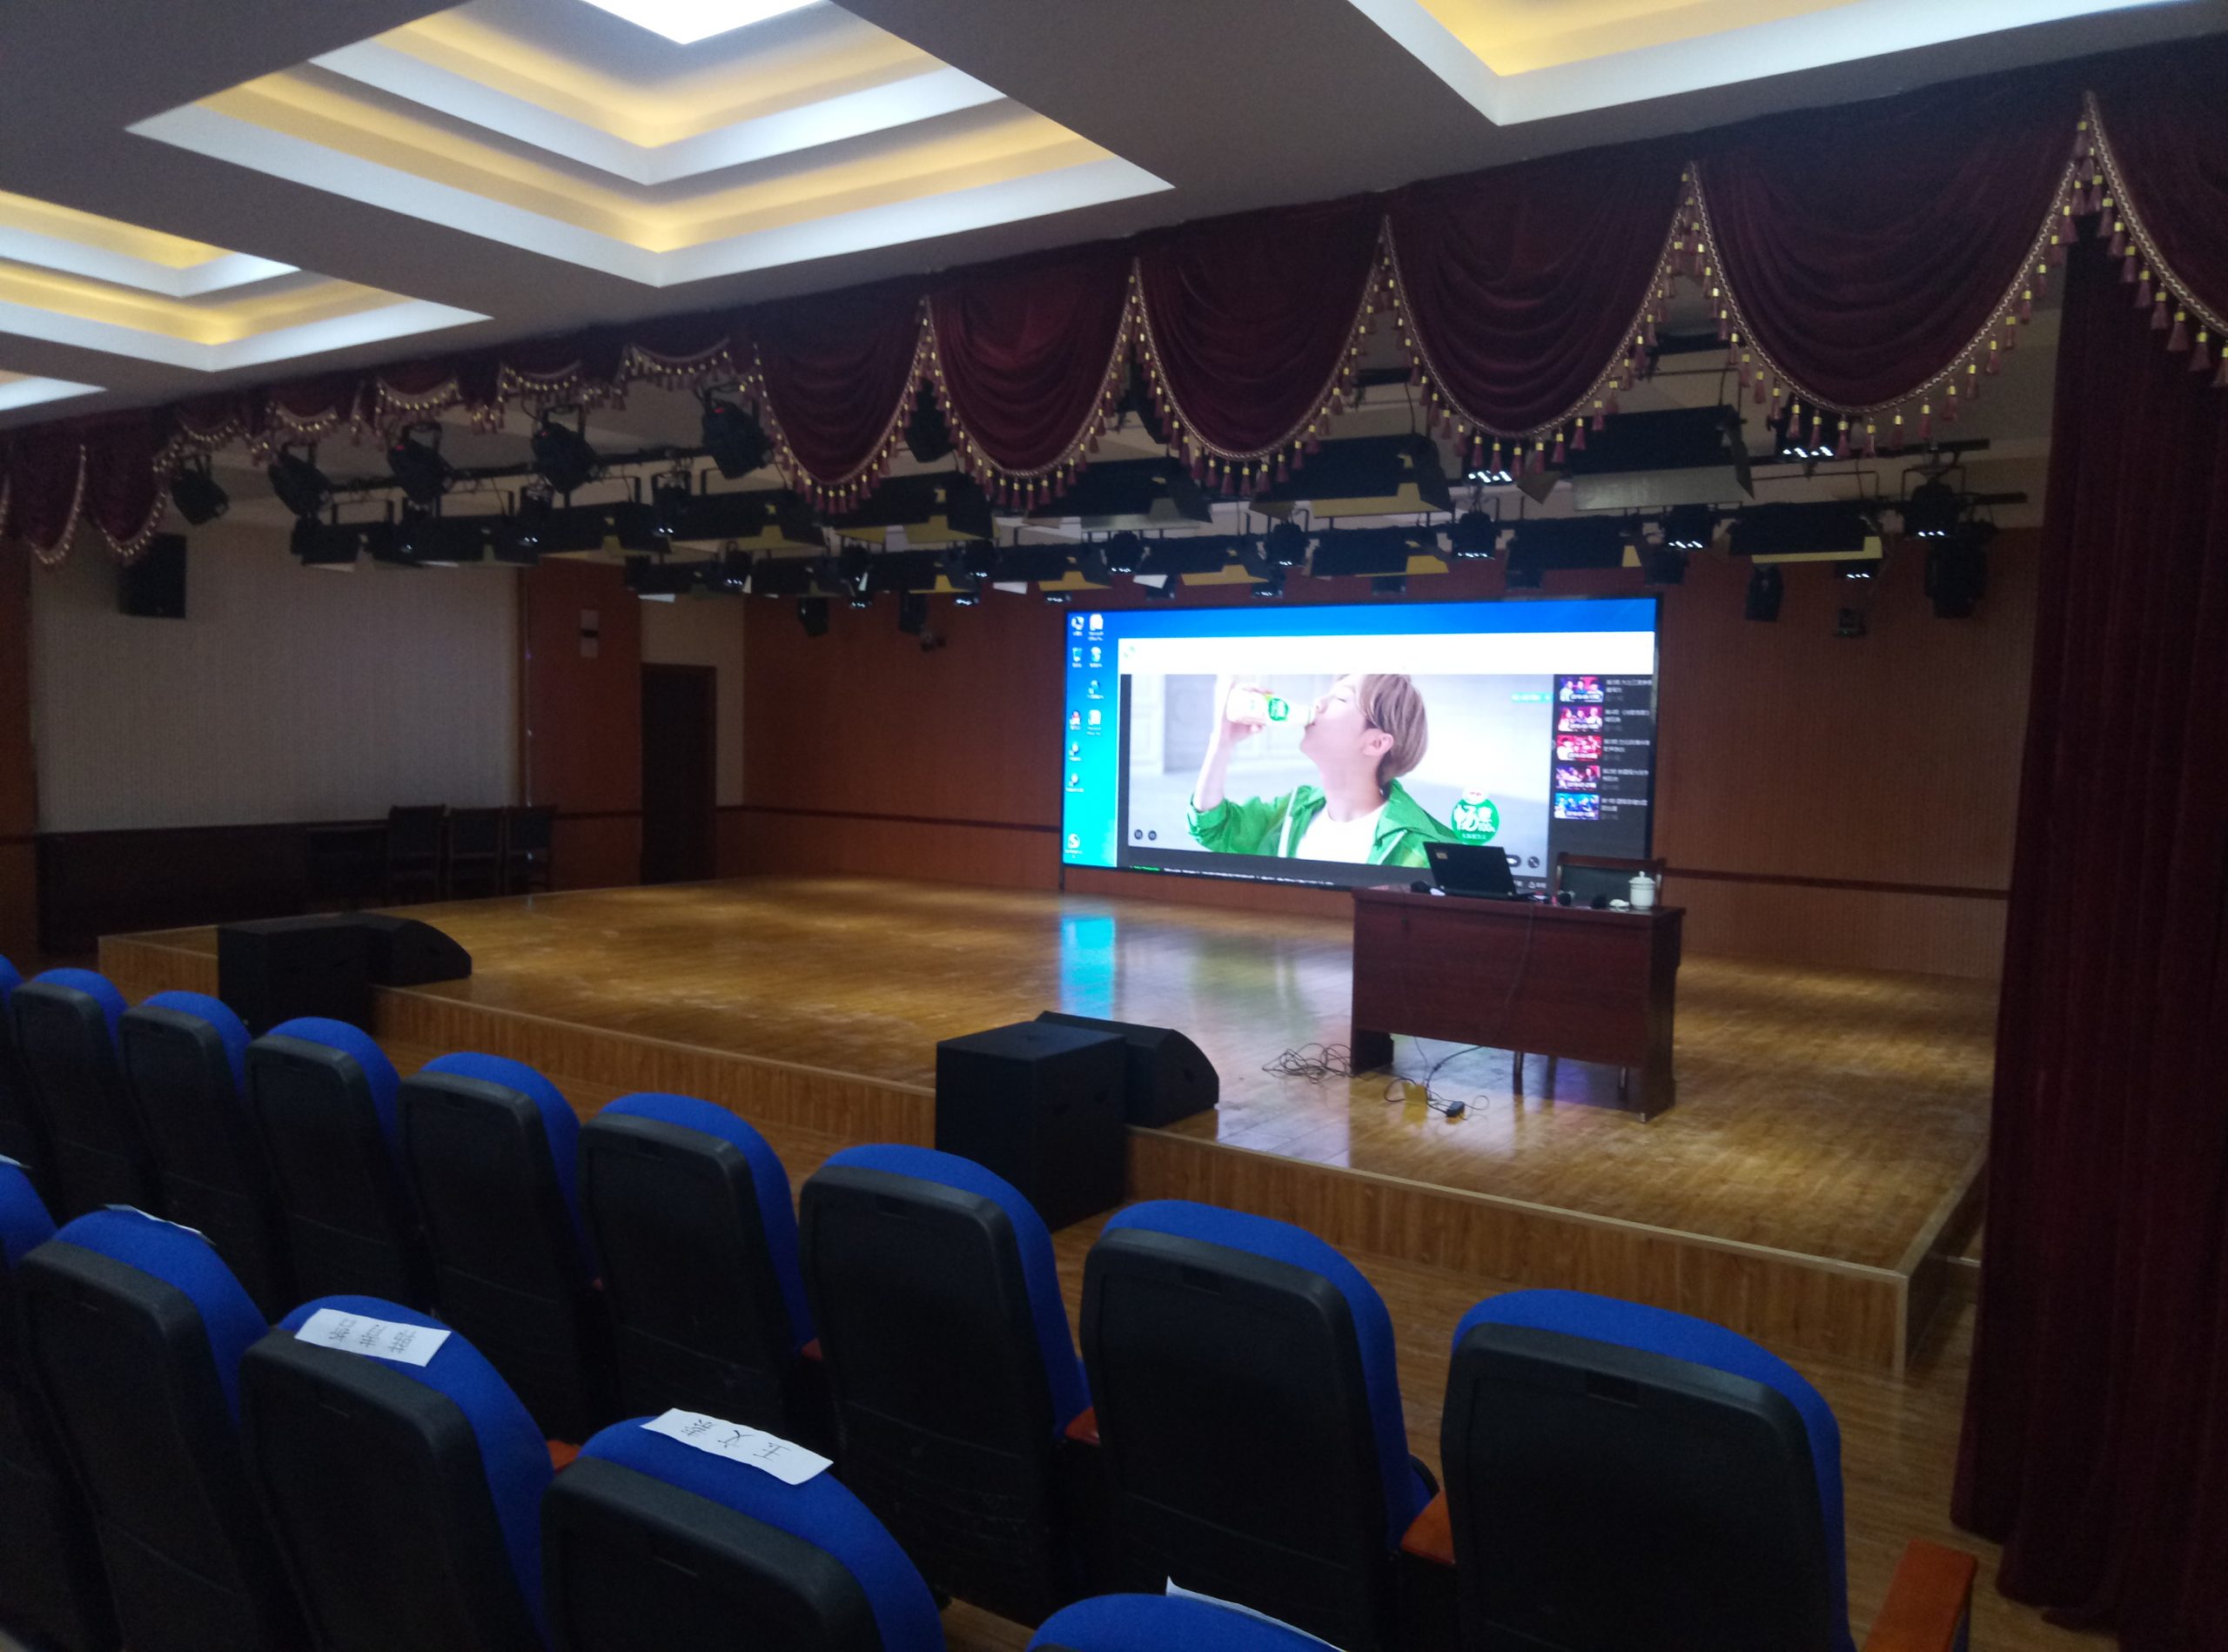 Differentiation between LED stage rental screen and traditional LED screen